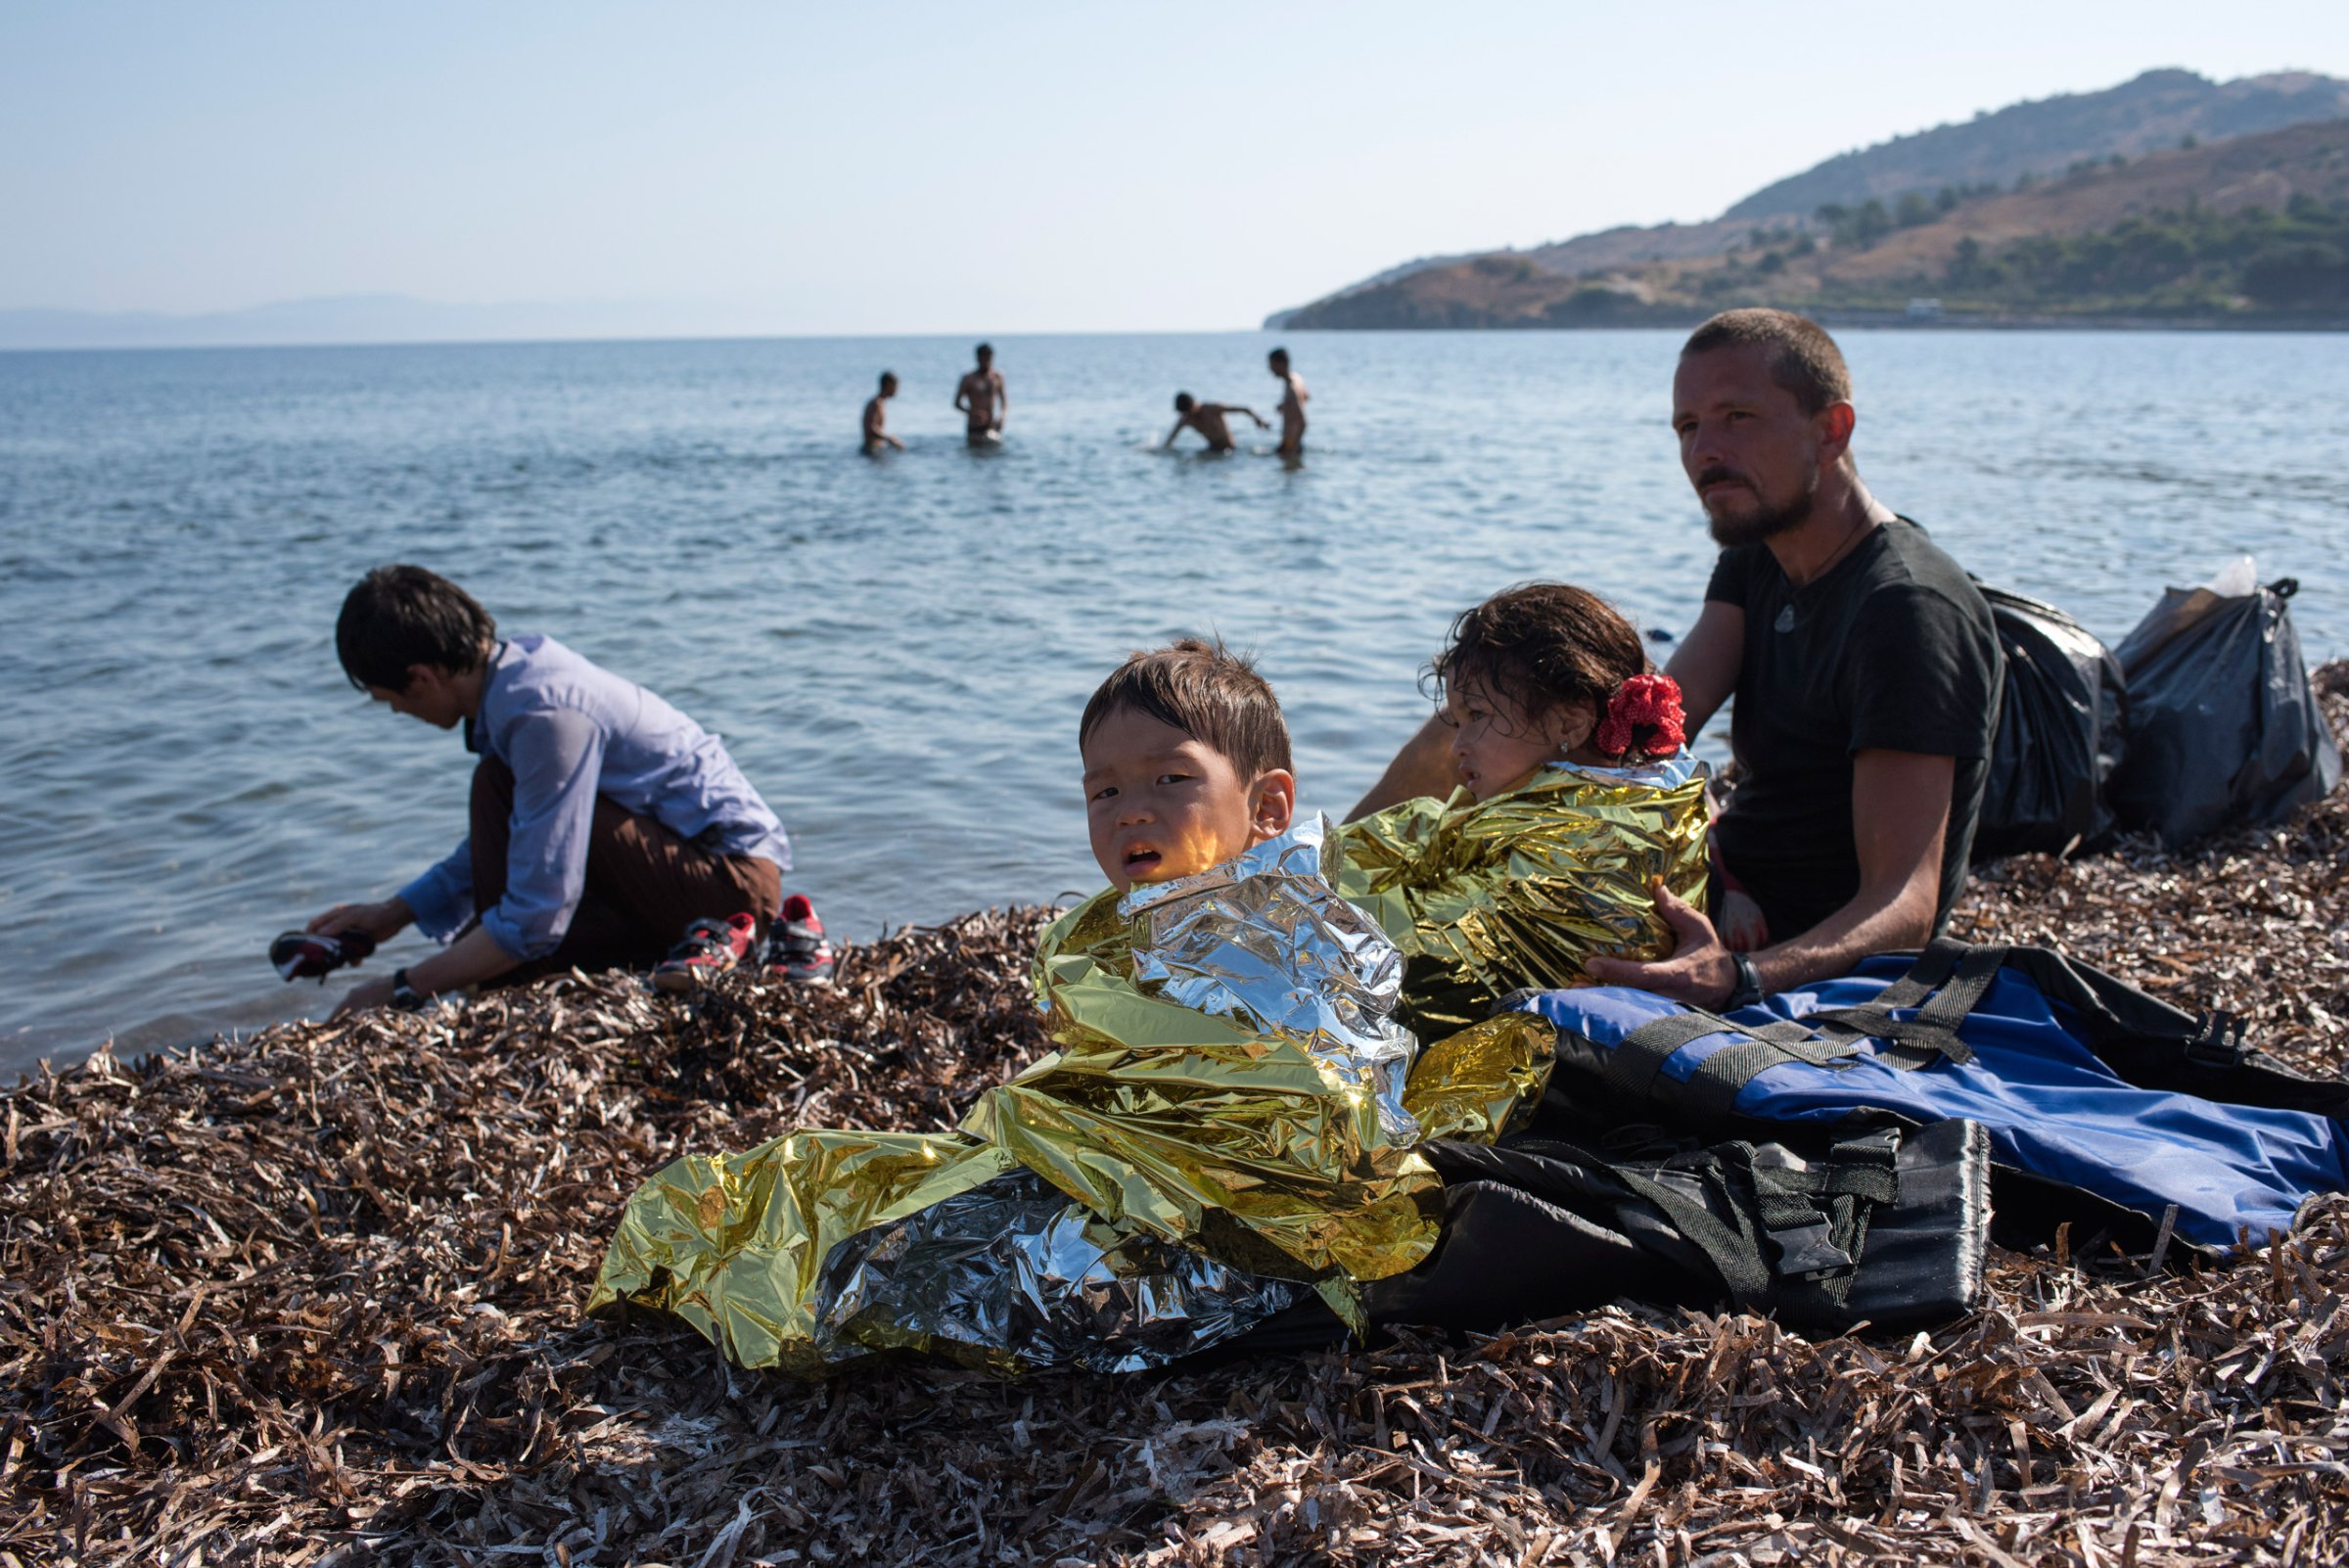 LESVOS, Greece - Sept. 4, 2015 A German volunteer helps an Afghan family that has just come by boat from Turkey to the Greek island of Lesvos, where they touch European soil for the first time since fleeing conflict and poverty in their homeland.